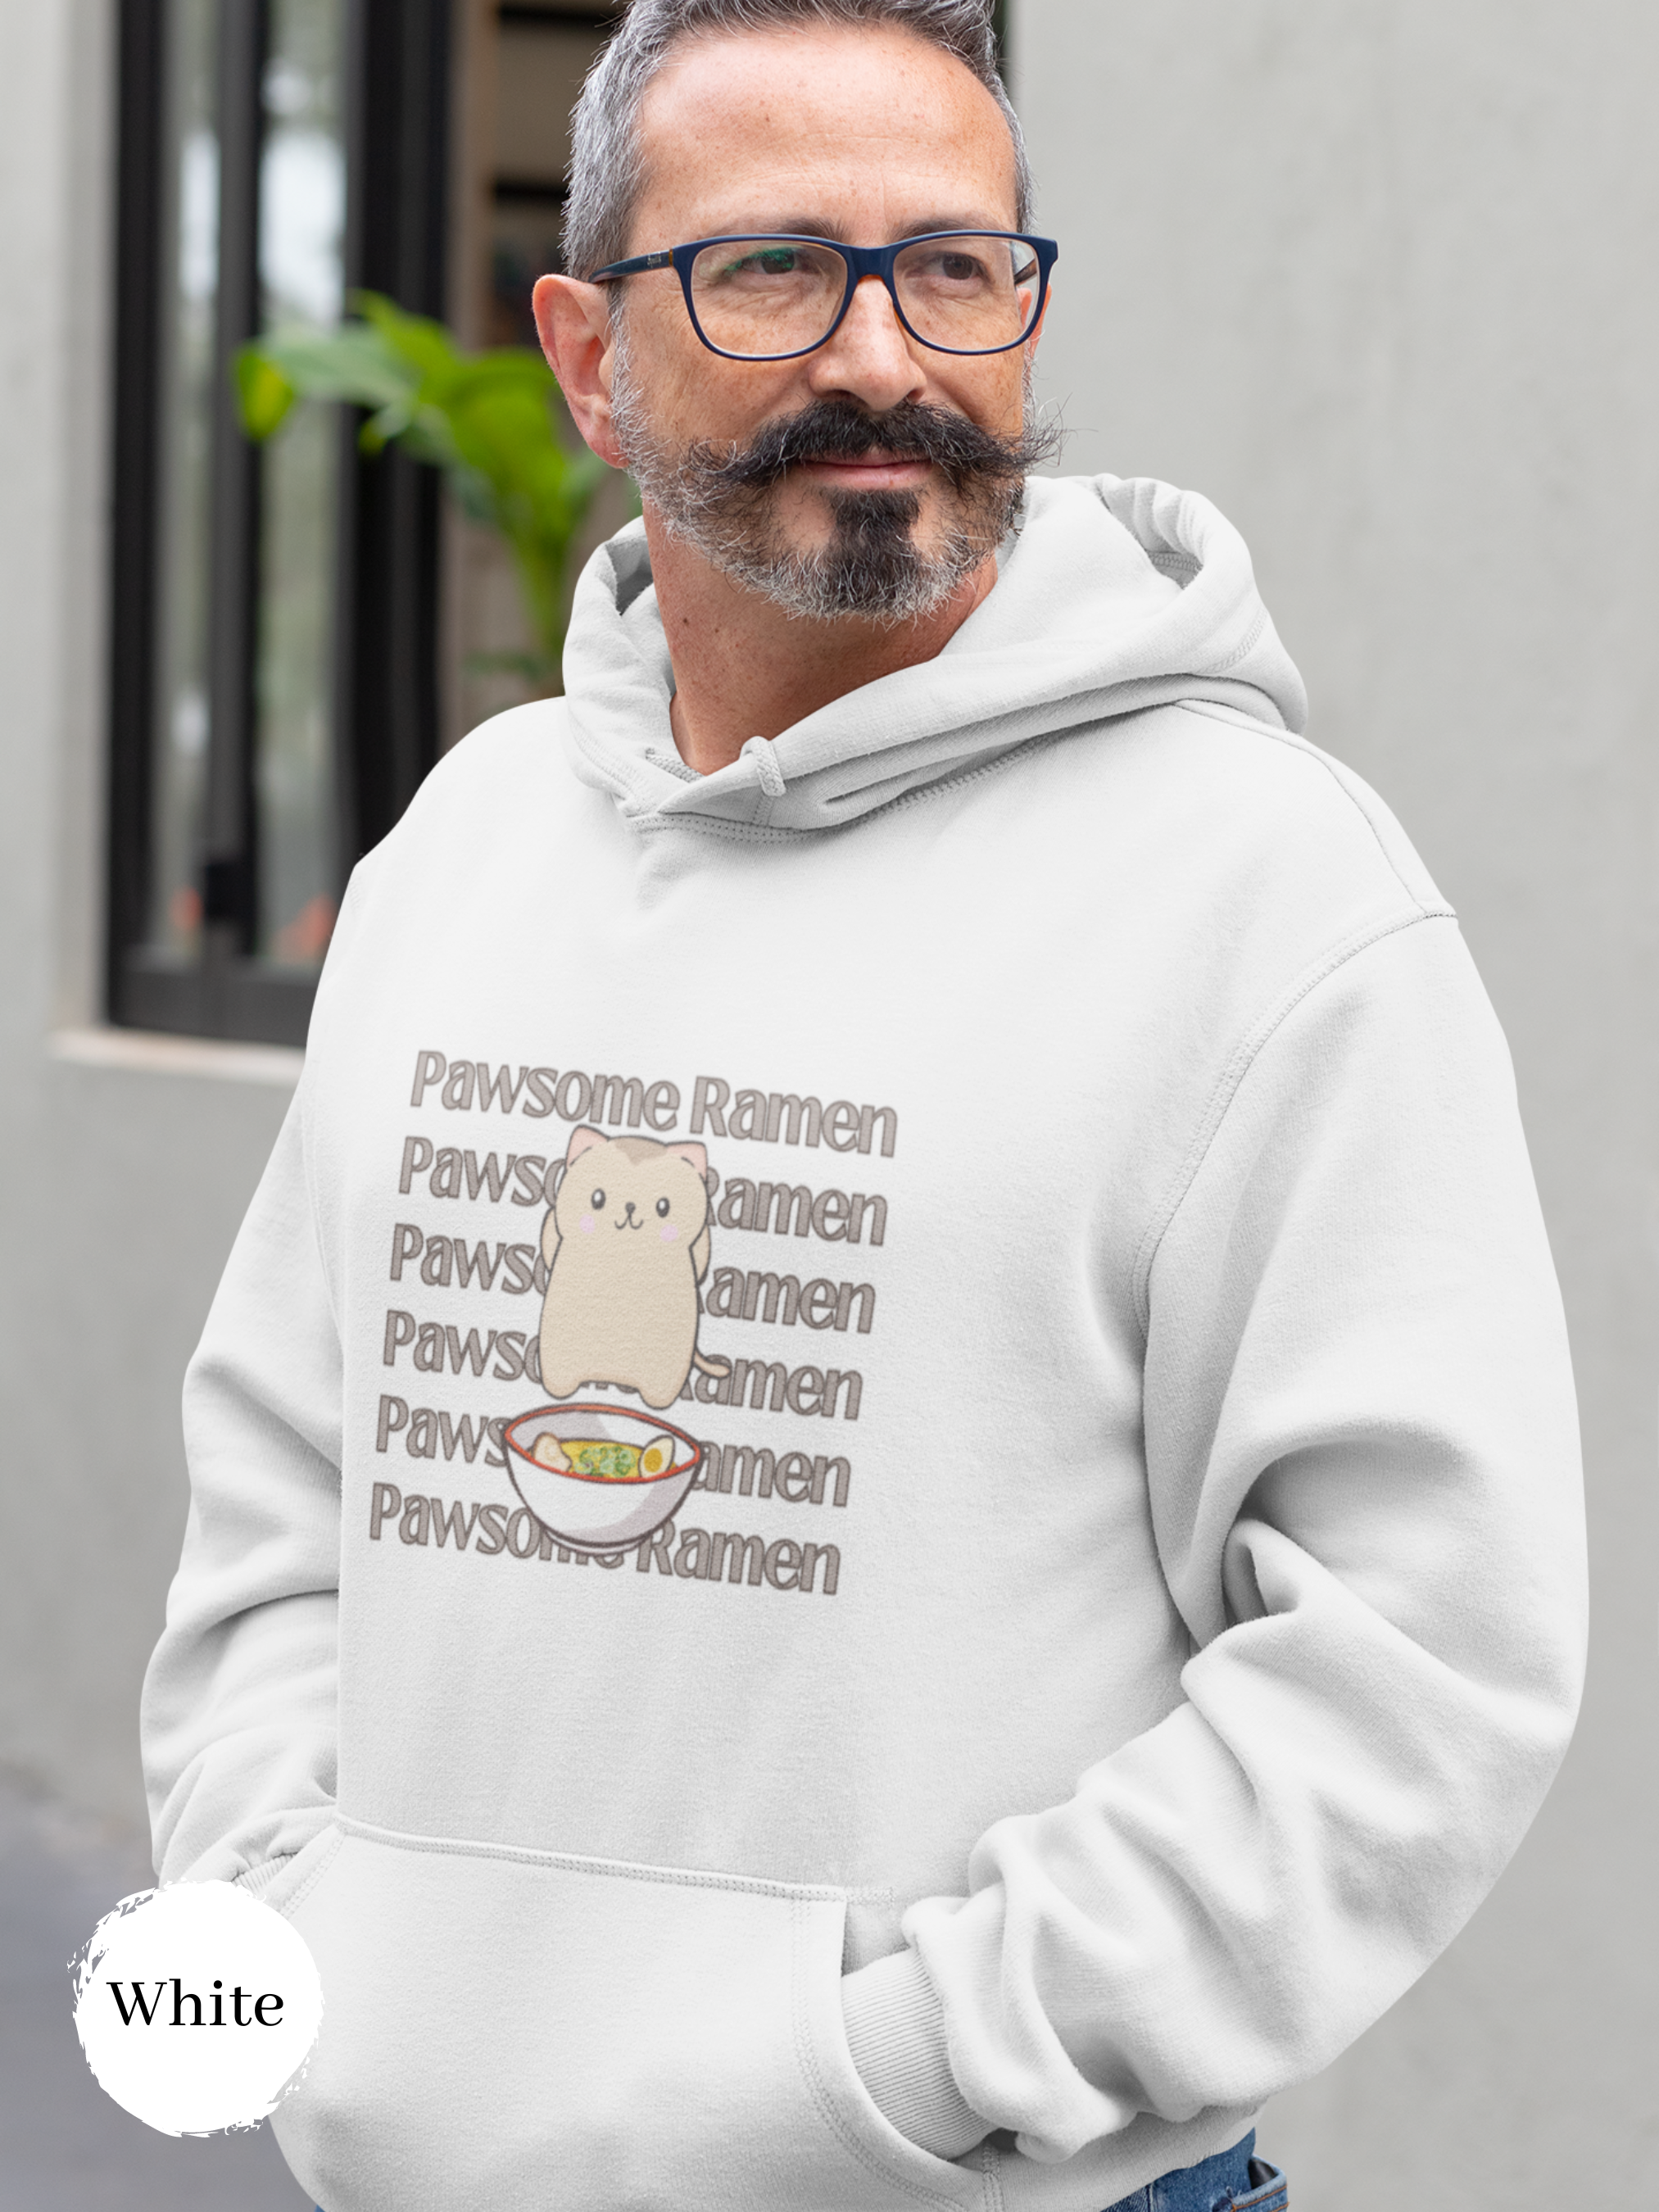 Ramen Hoodie: Pawsome Ramen with Squishy Mochi Cat and Noodles Galore - A Foodie's Ramen Art Delight